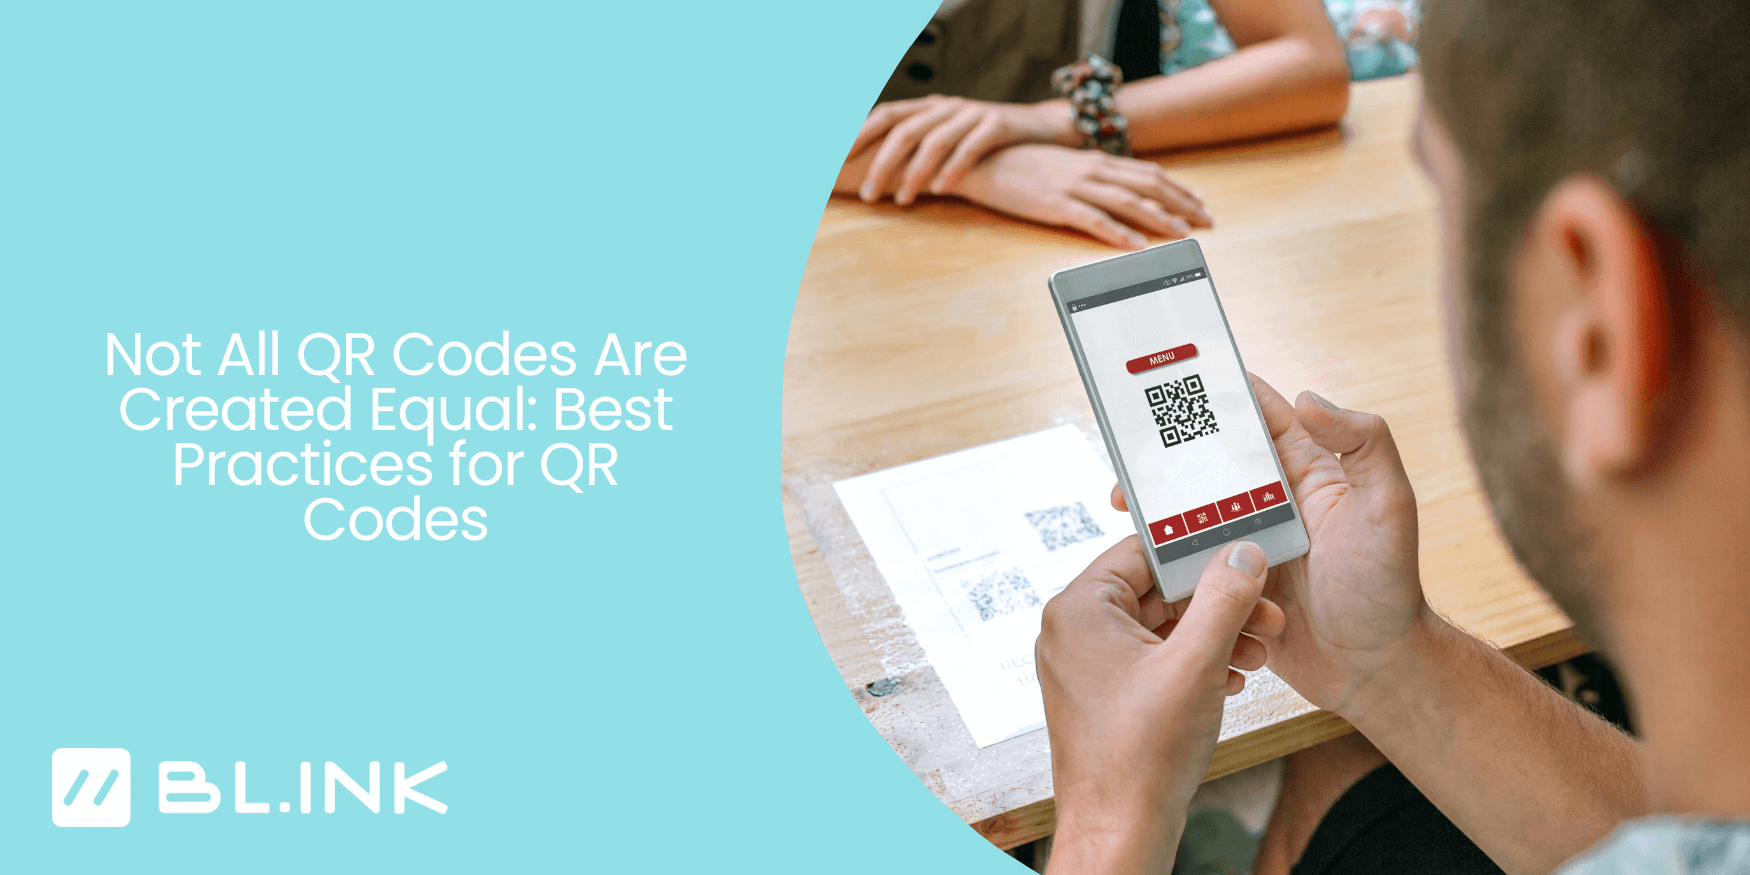 Not-All-QR-Codes-Are-Created-Equal:-Best-Practices-for-QR-Codes